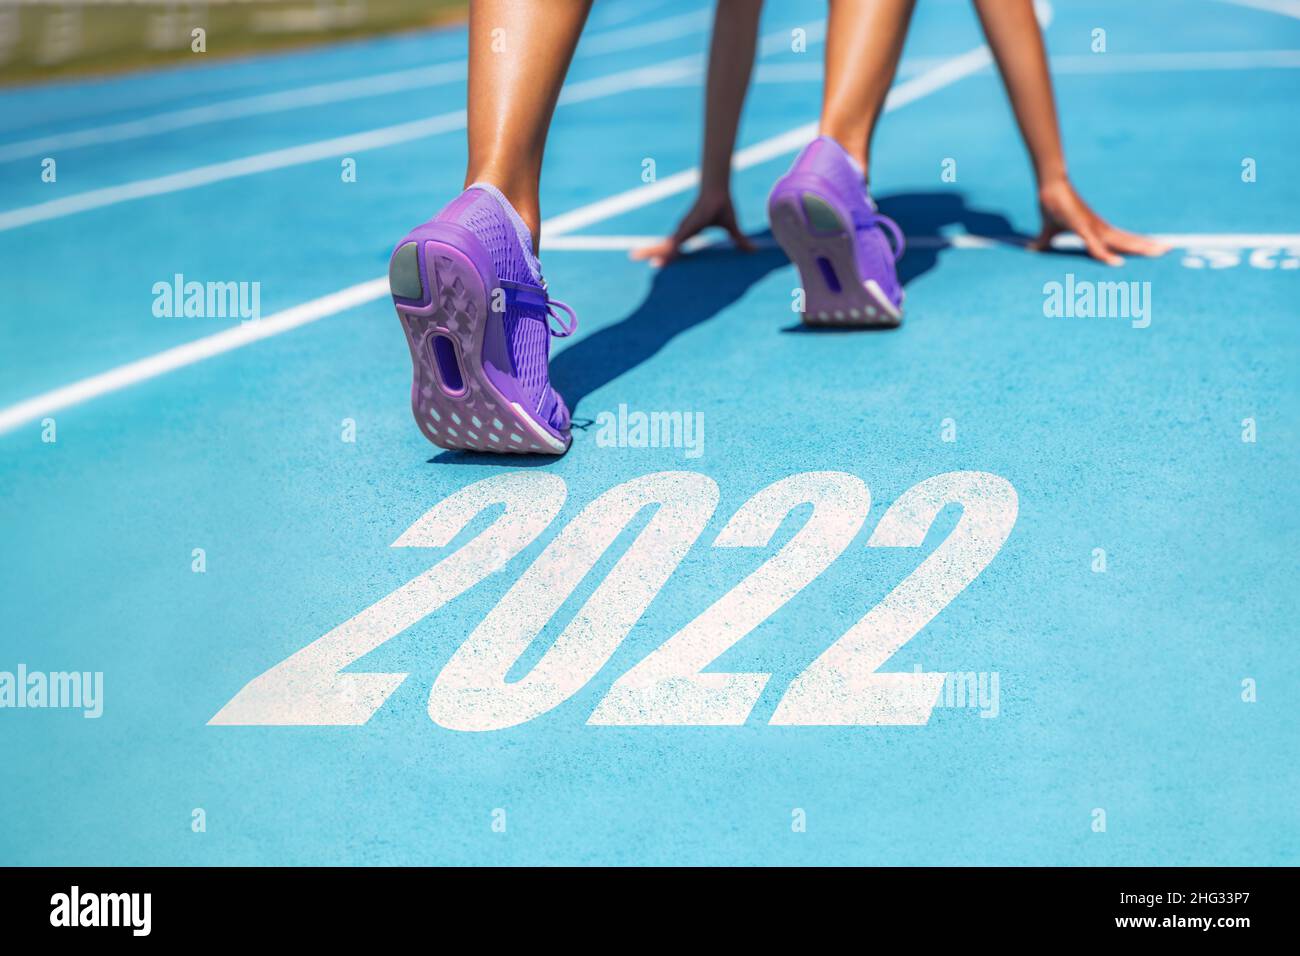 New Year resolution 2022 fitness weight loss challenge athlete woman running at race ready set go motivation for getting in shape Stock Photo